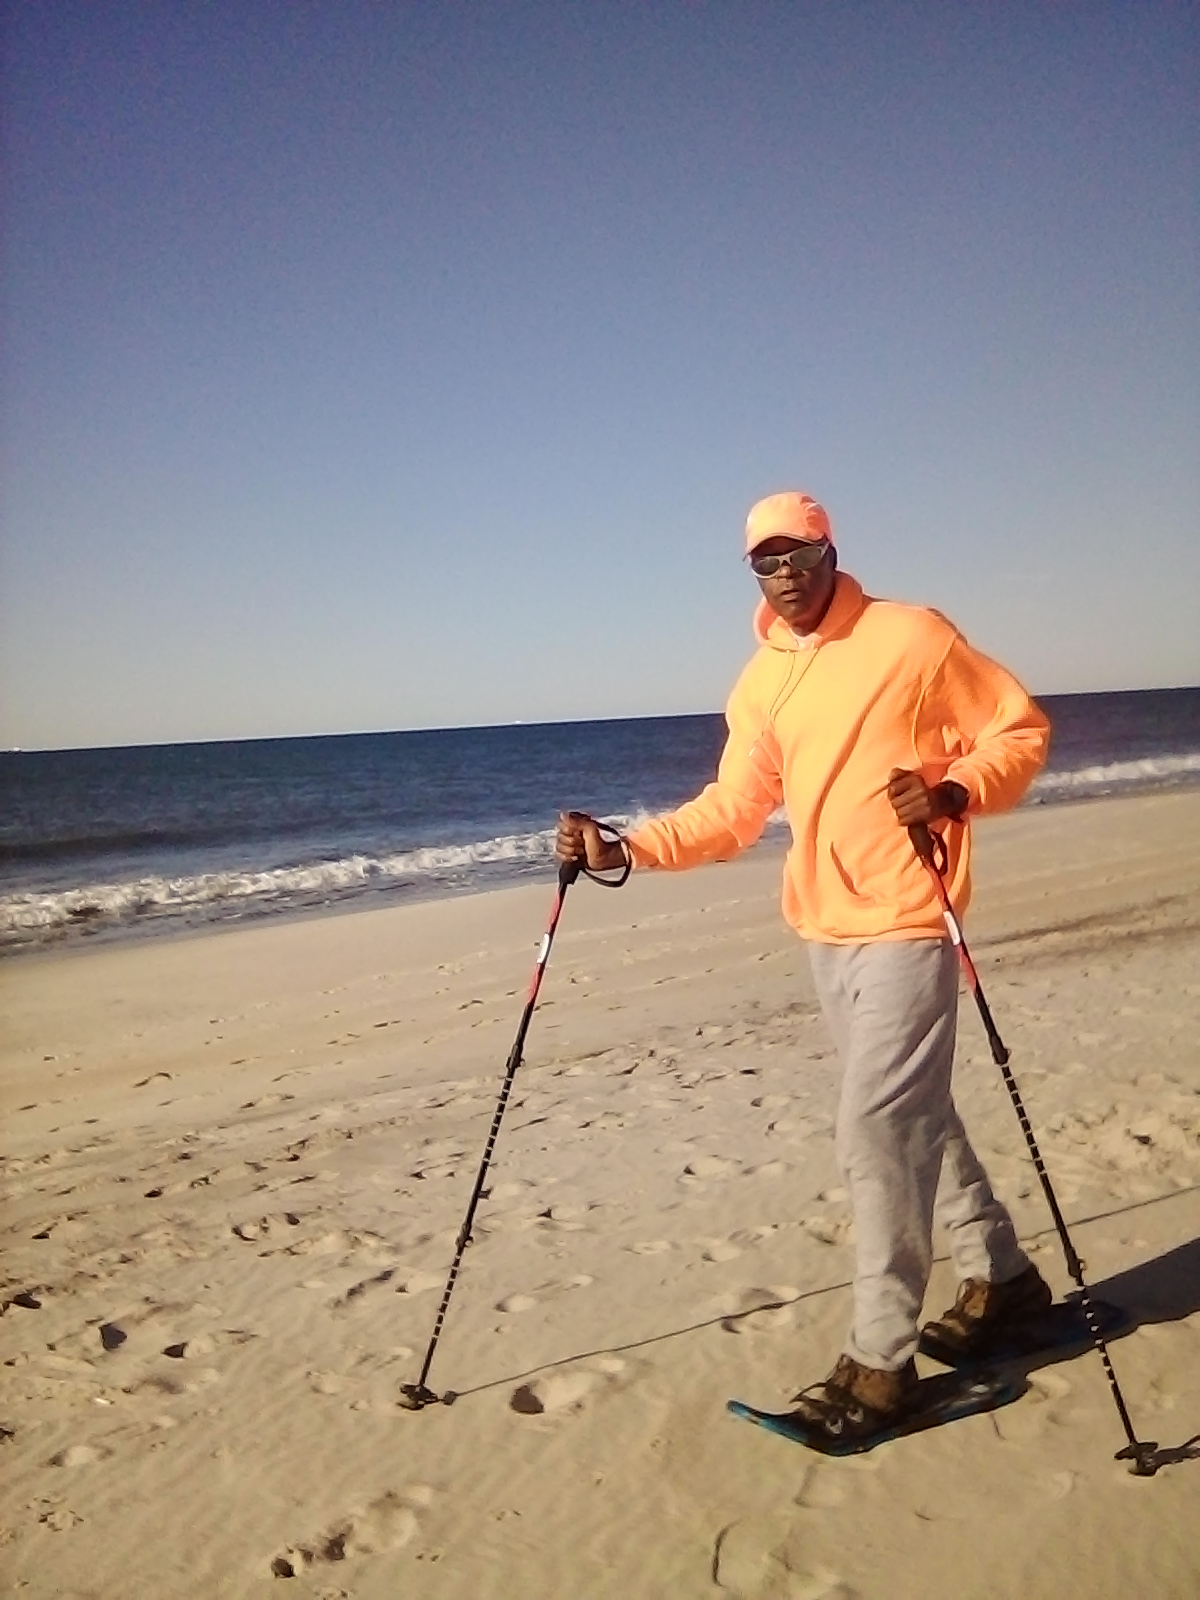 snowshoes on sand for fitness: man on beach wearing snowshoes and using poles